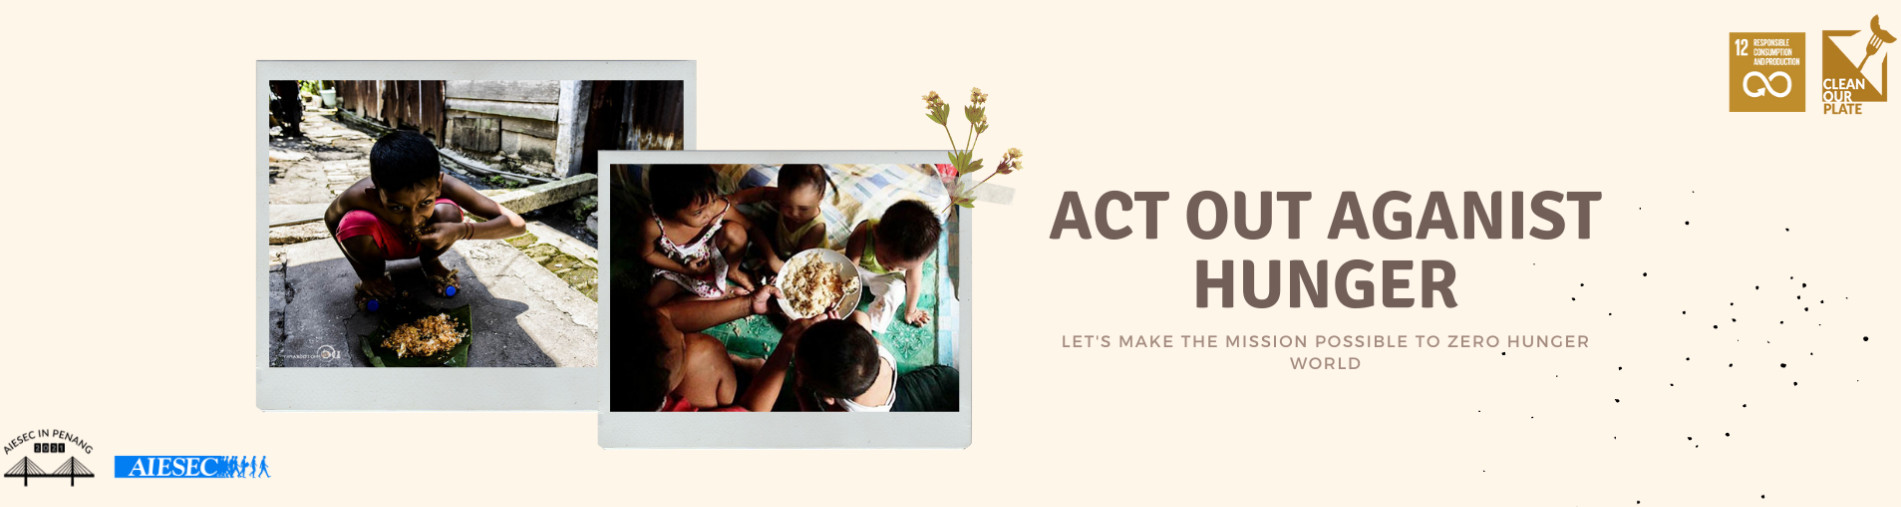 Act out against hunger